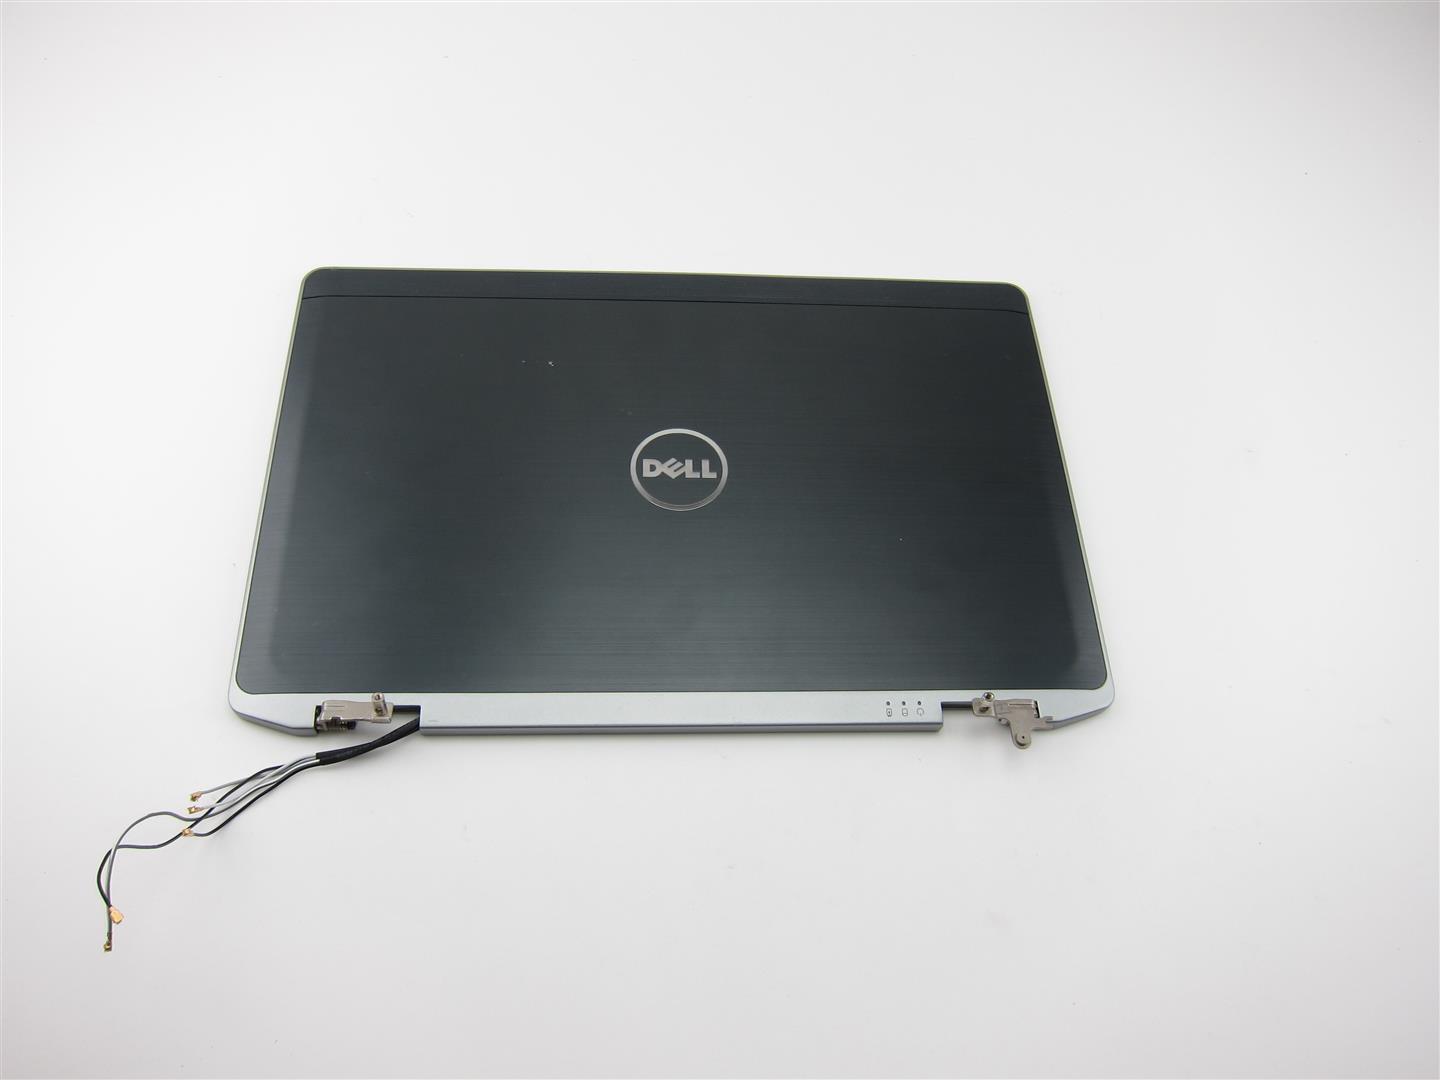 Dell Latitude E6330 LCD Back Cover Lid w/ Hinges - 066MGC 66MGC 954 - $9.91